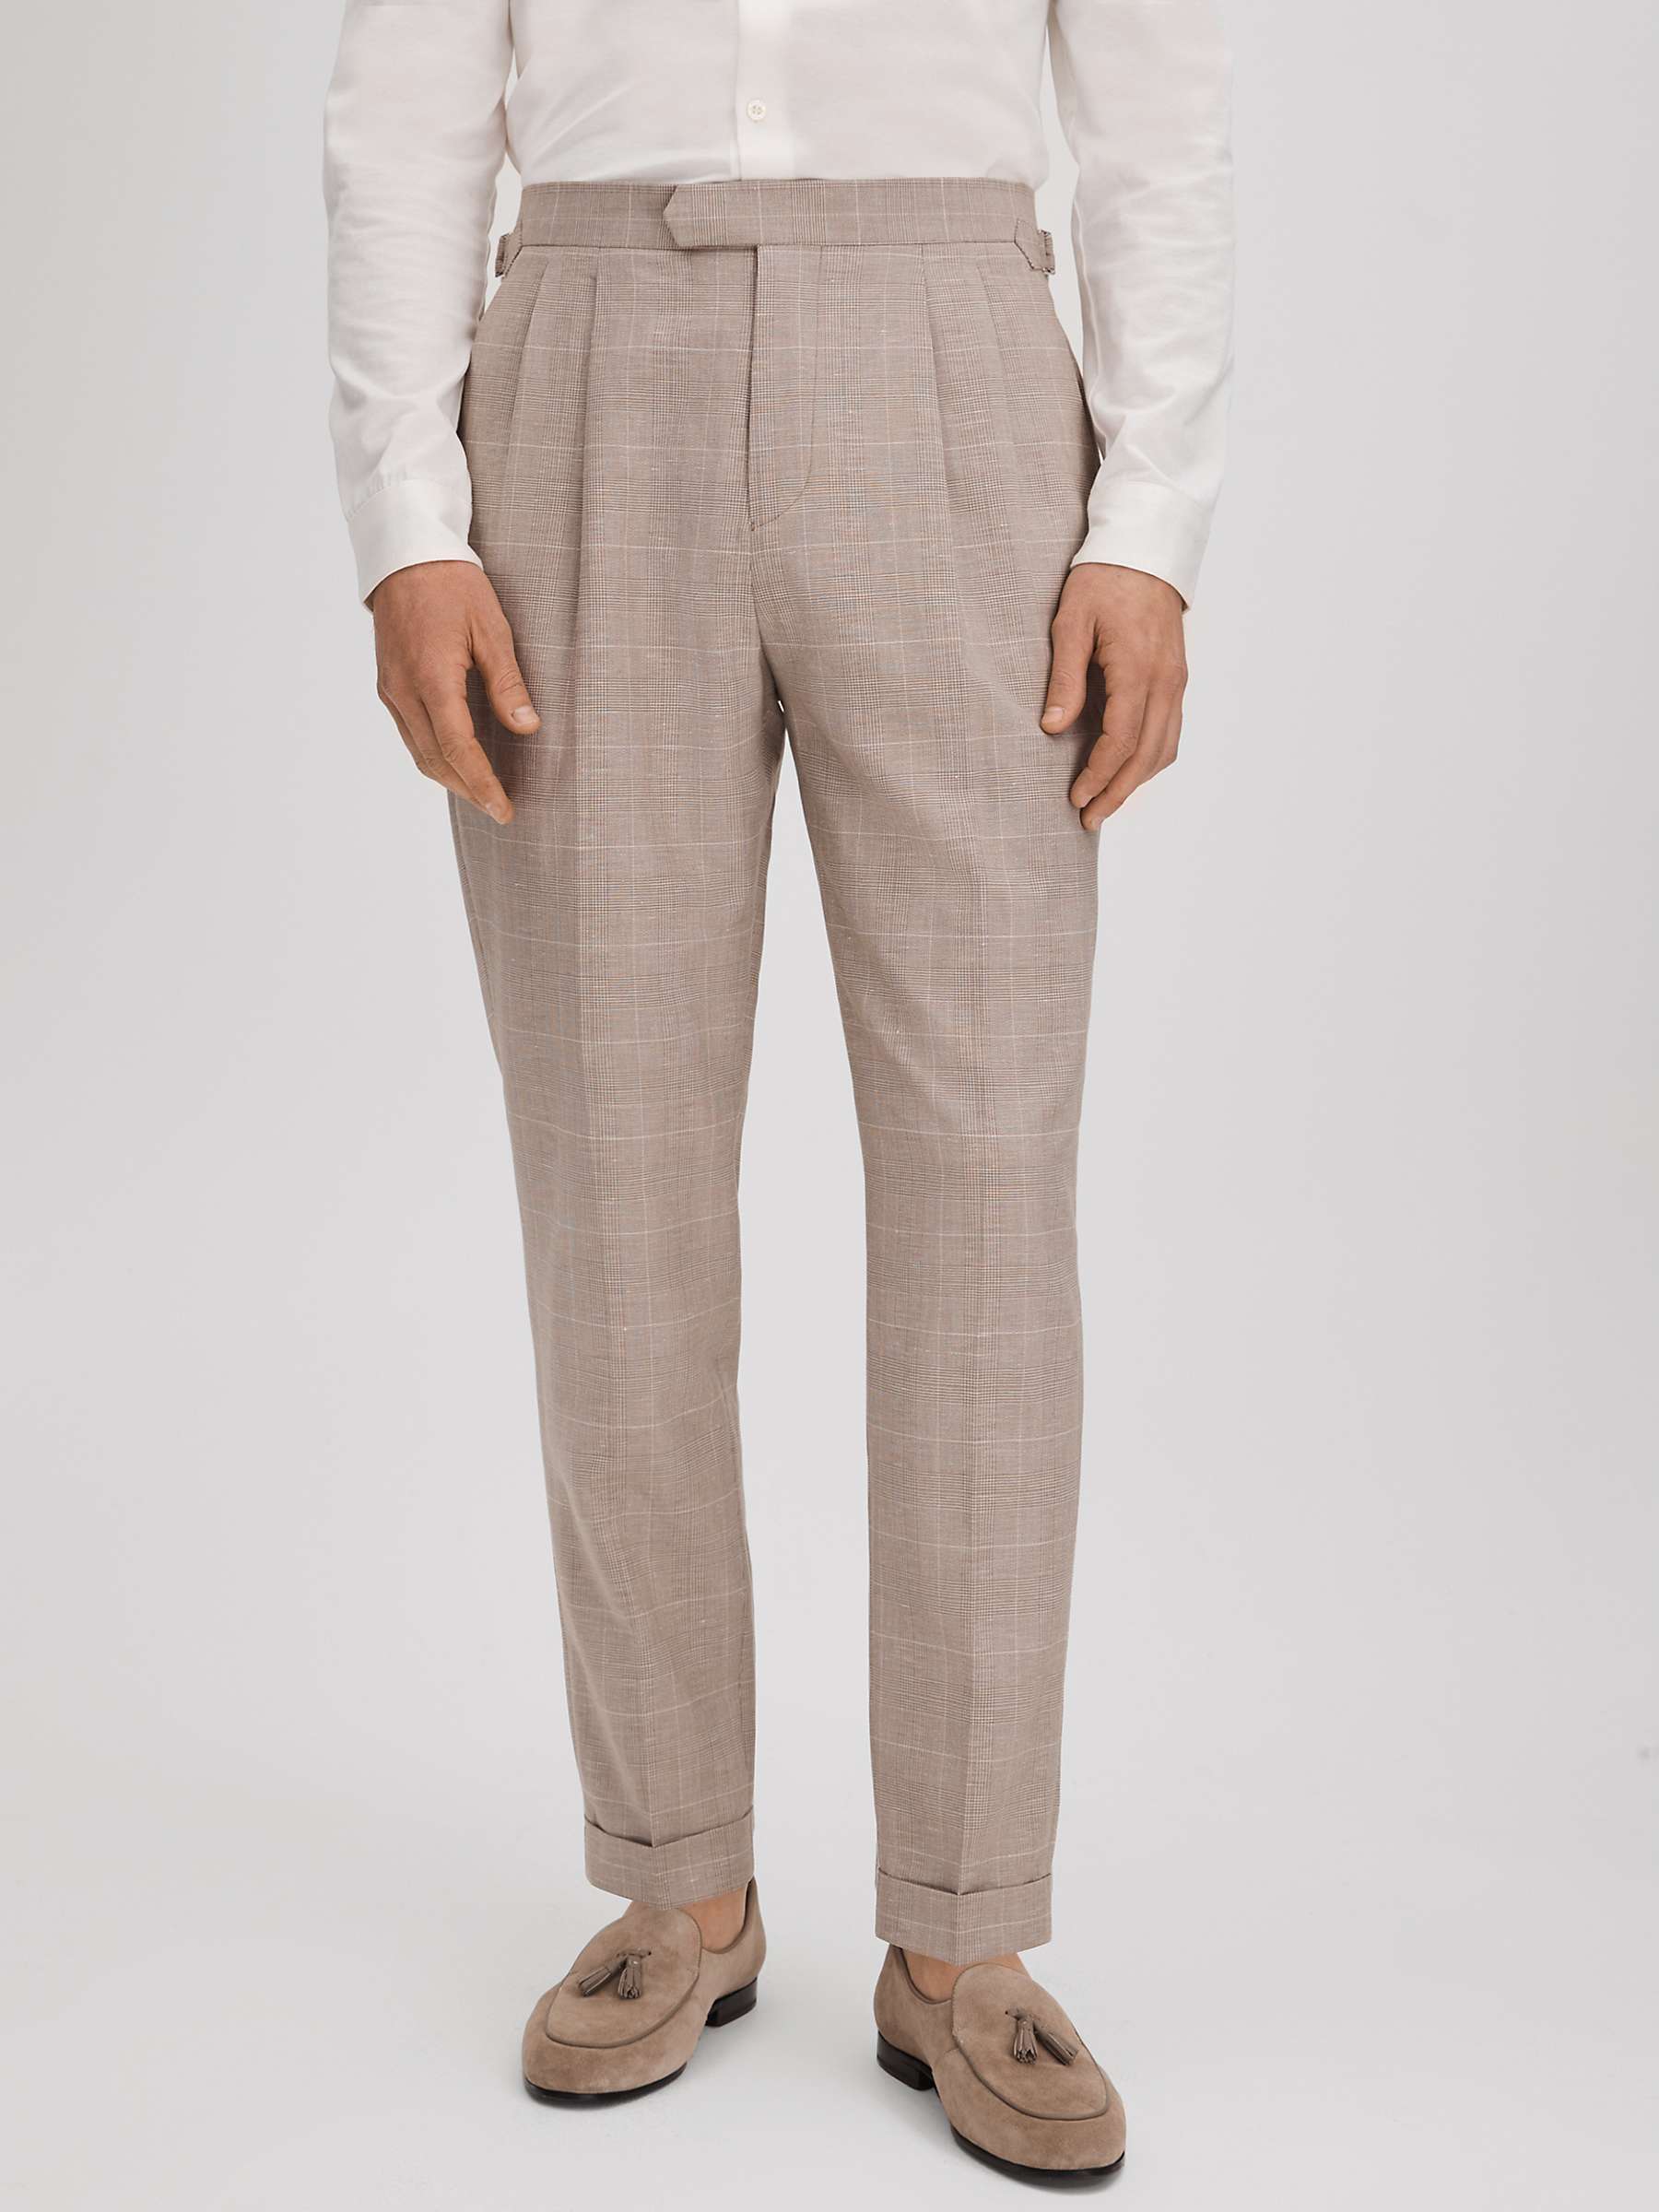 Buy Reiss Collect Hopsack Check Trousers, Oatmeal Online at johnlewis.com